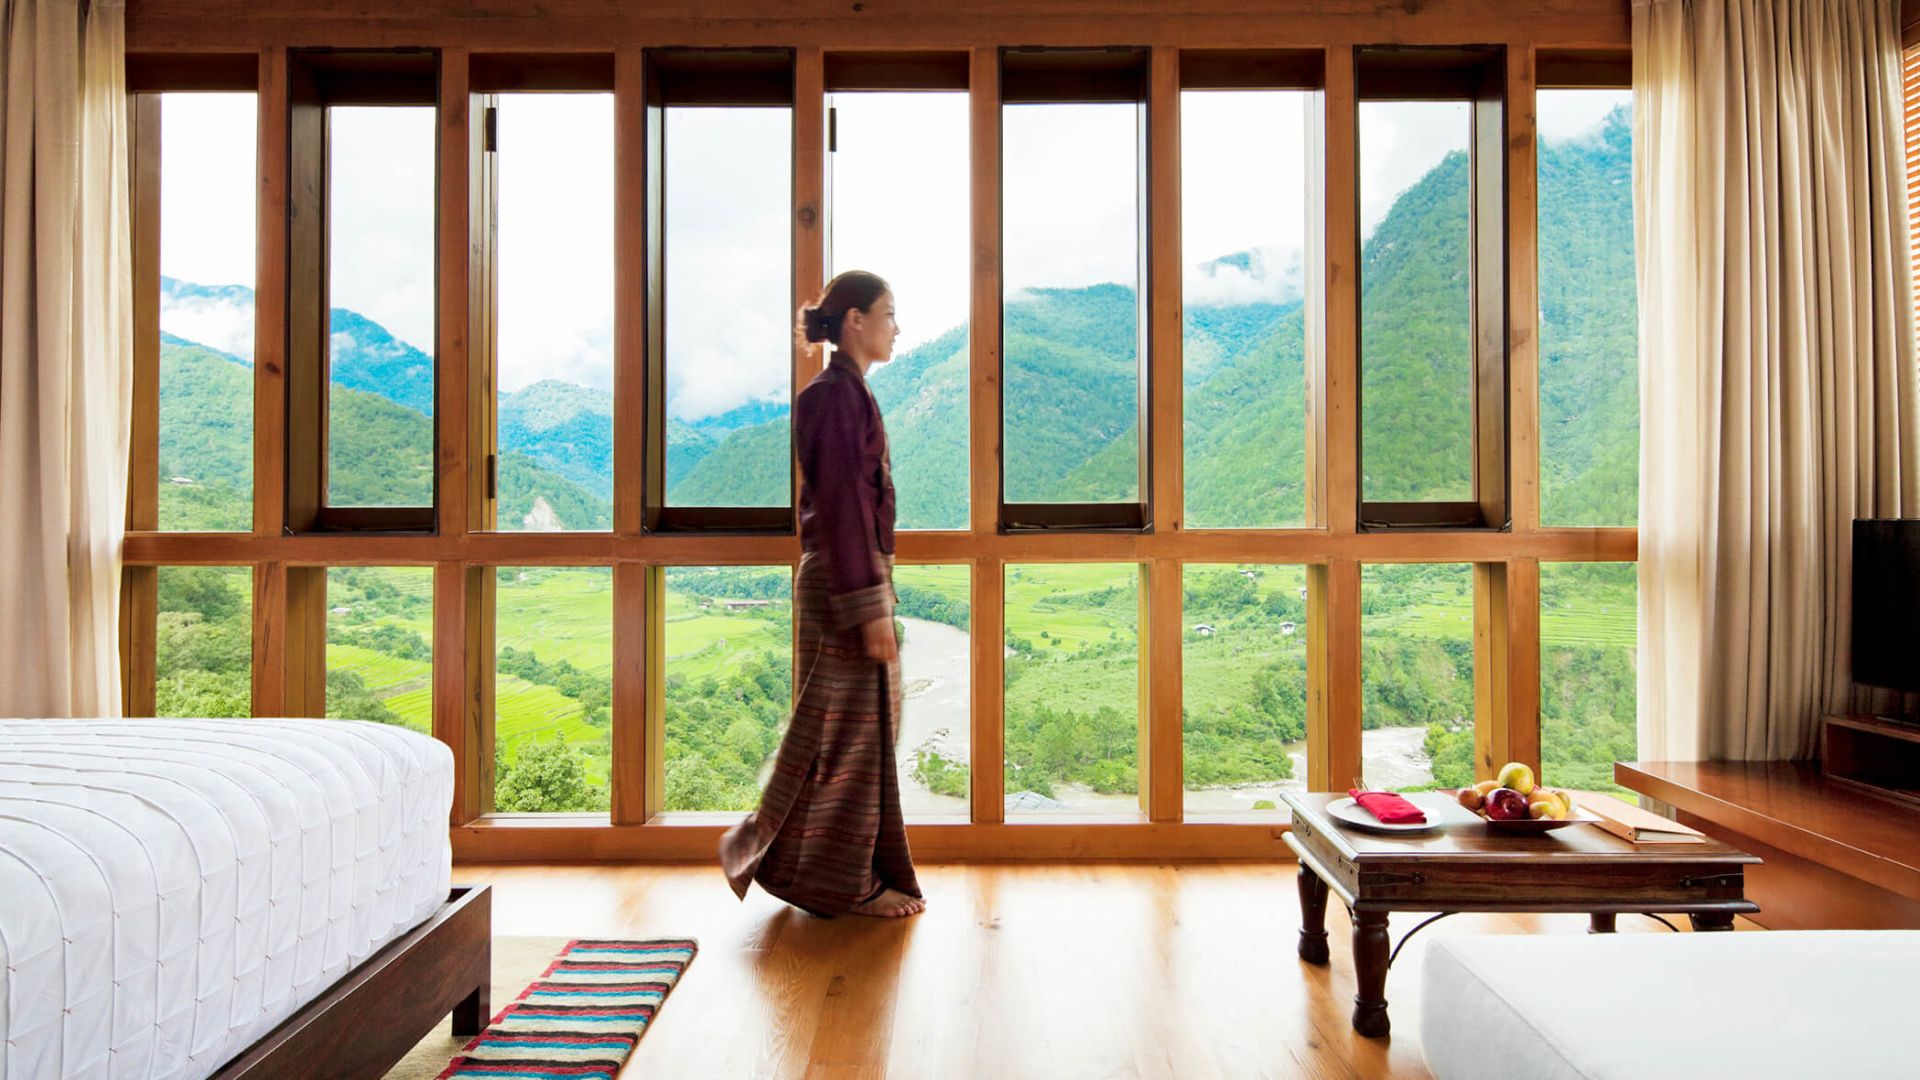 Valley View Room overlooking the Mo Chhu River - Image